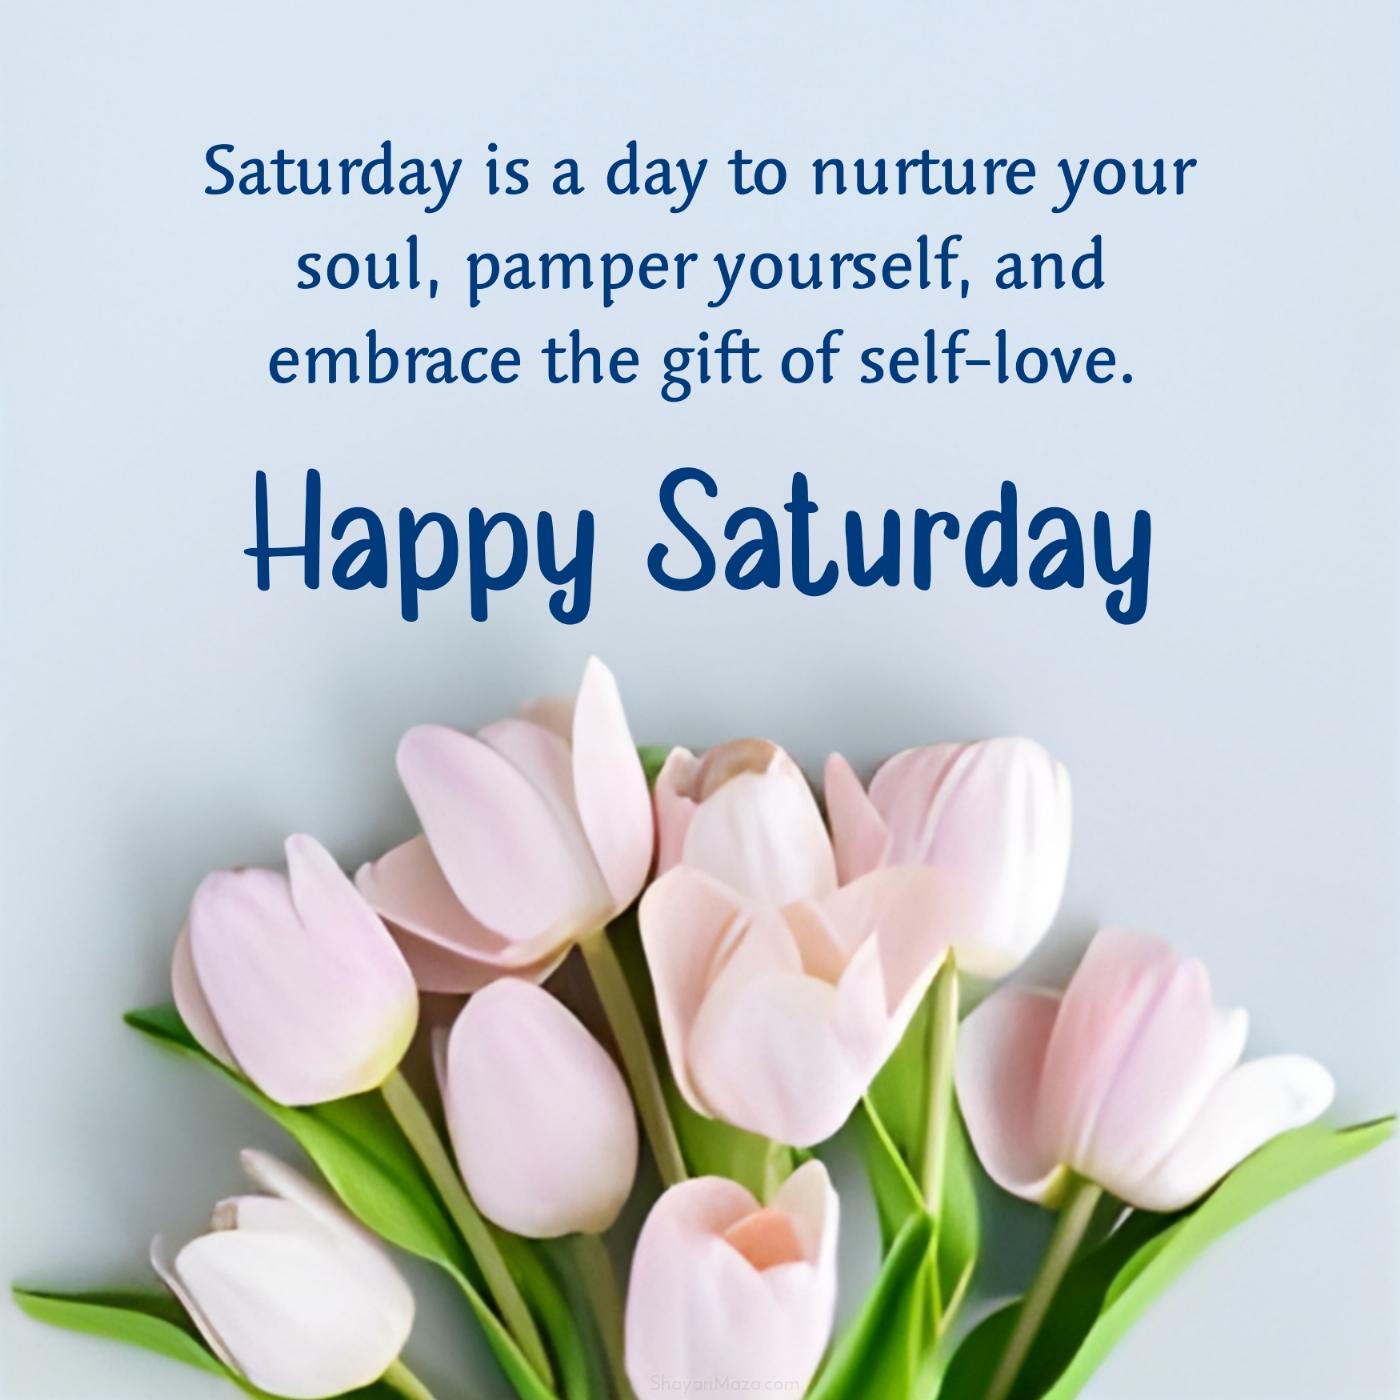 Saturday is a day to nurture your soul pamper yourself